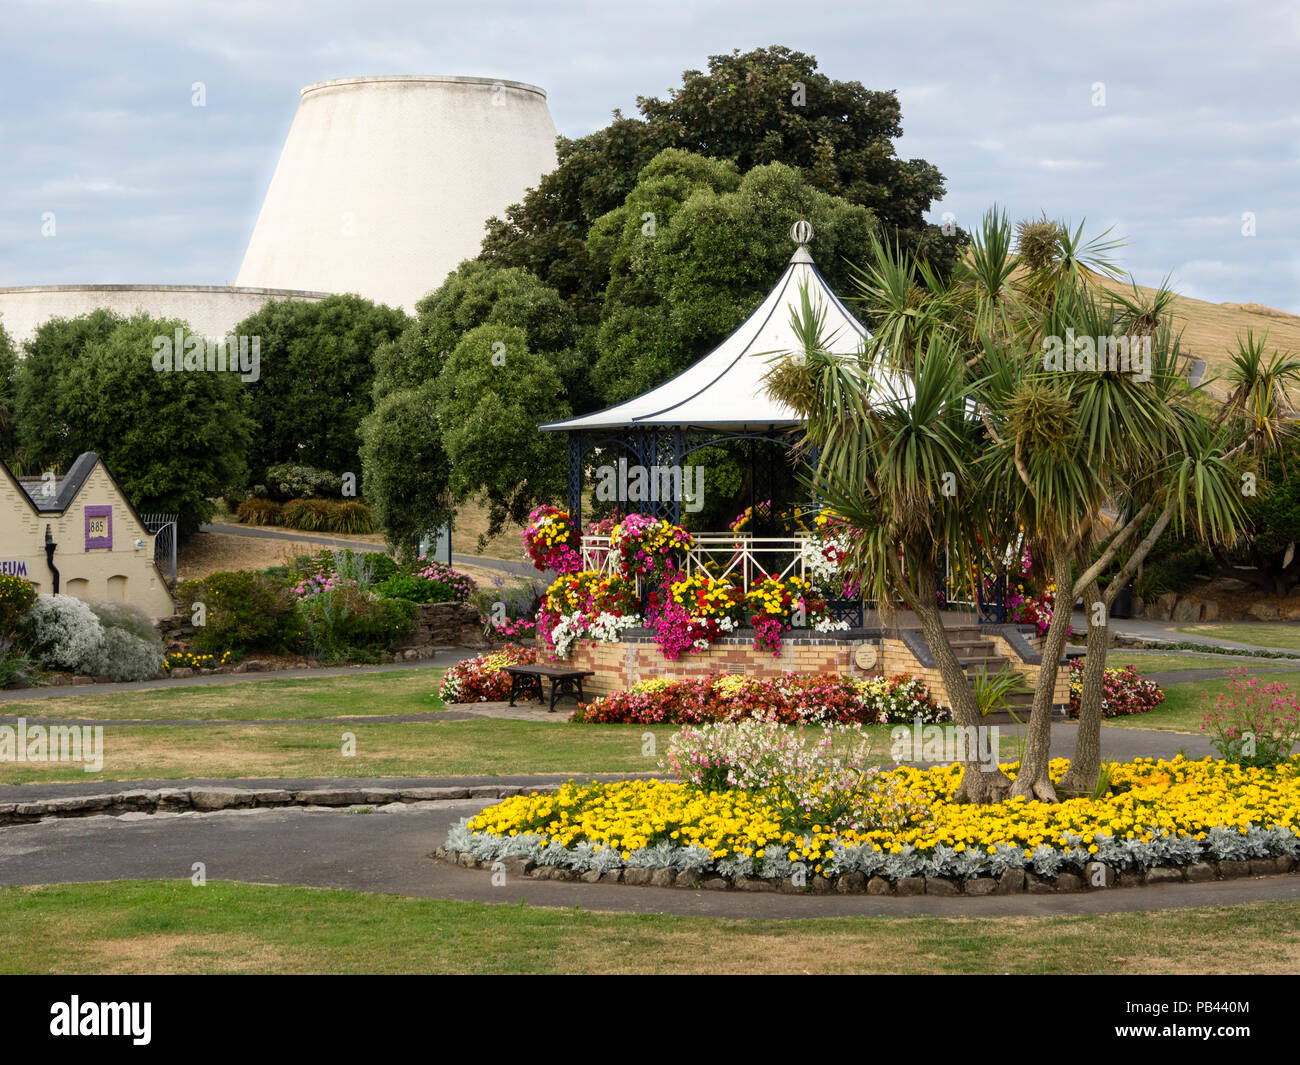 Summer bedding flowers in beds and round the bandstand in Runnymede Gardens, Ilfracombe, Devon, UK.  Landmark theatre in the background Stock Photo